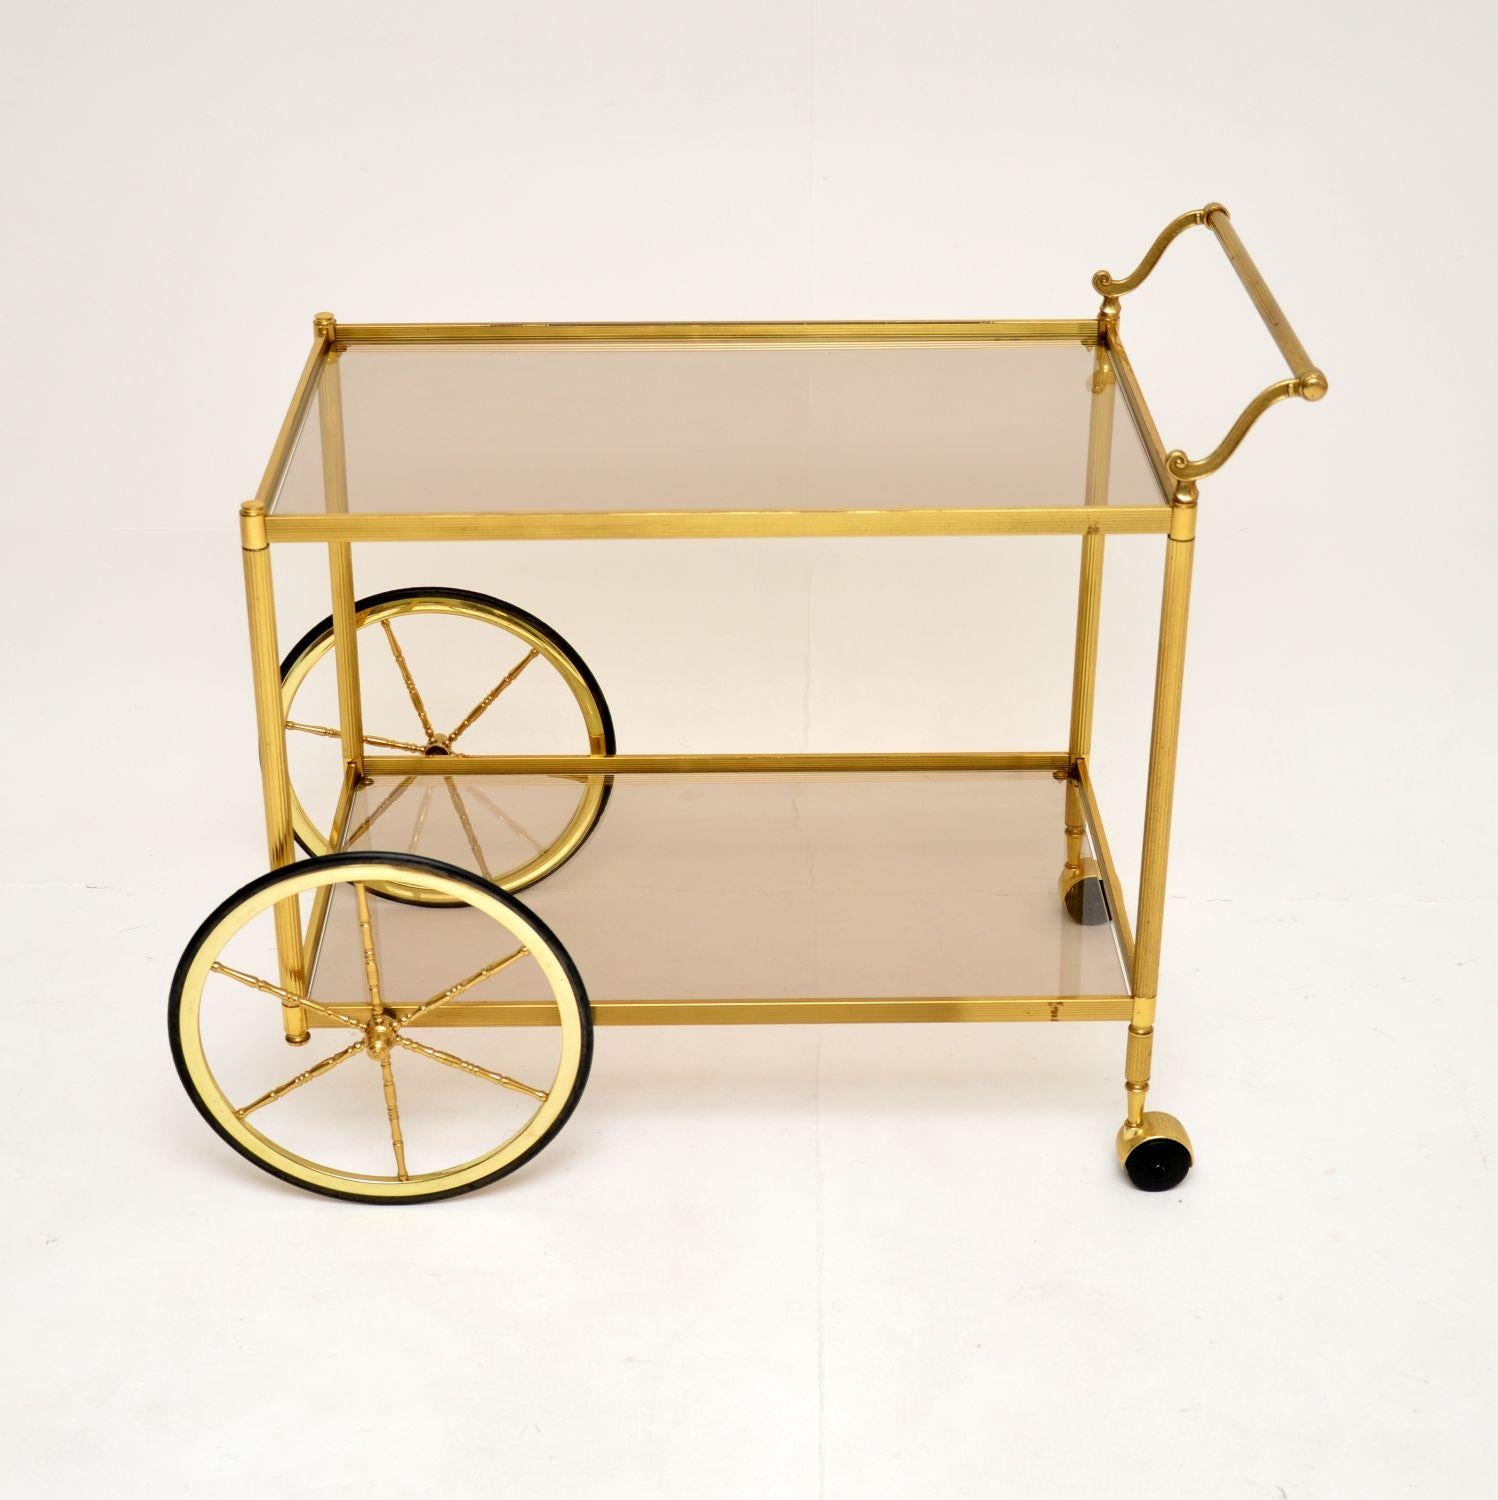 A very stylish and useful 1970’s vintage French brass & glass drinks trolley / bar cart.

The quality is fantastic, this is a great size and is beautifully designed, with fluted brass supports, a nicely shaped brass handle and fantastic large front